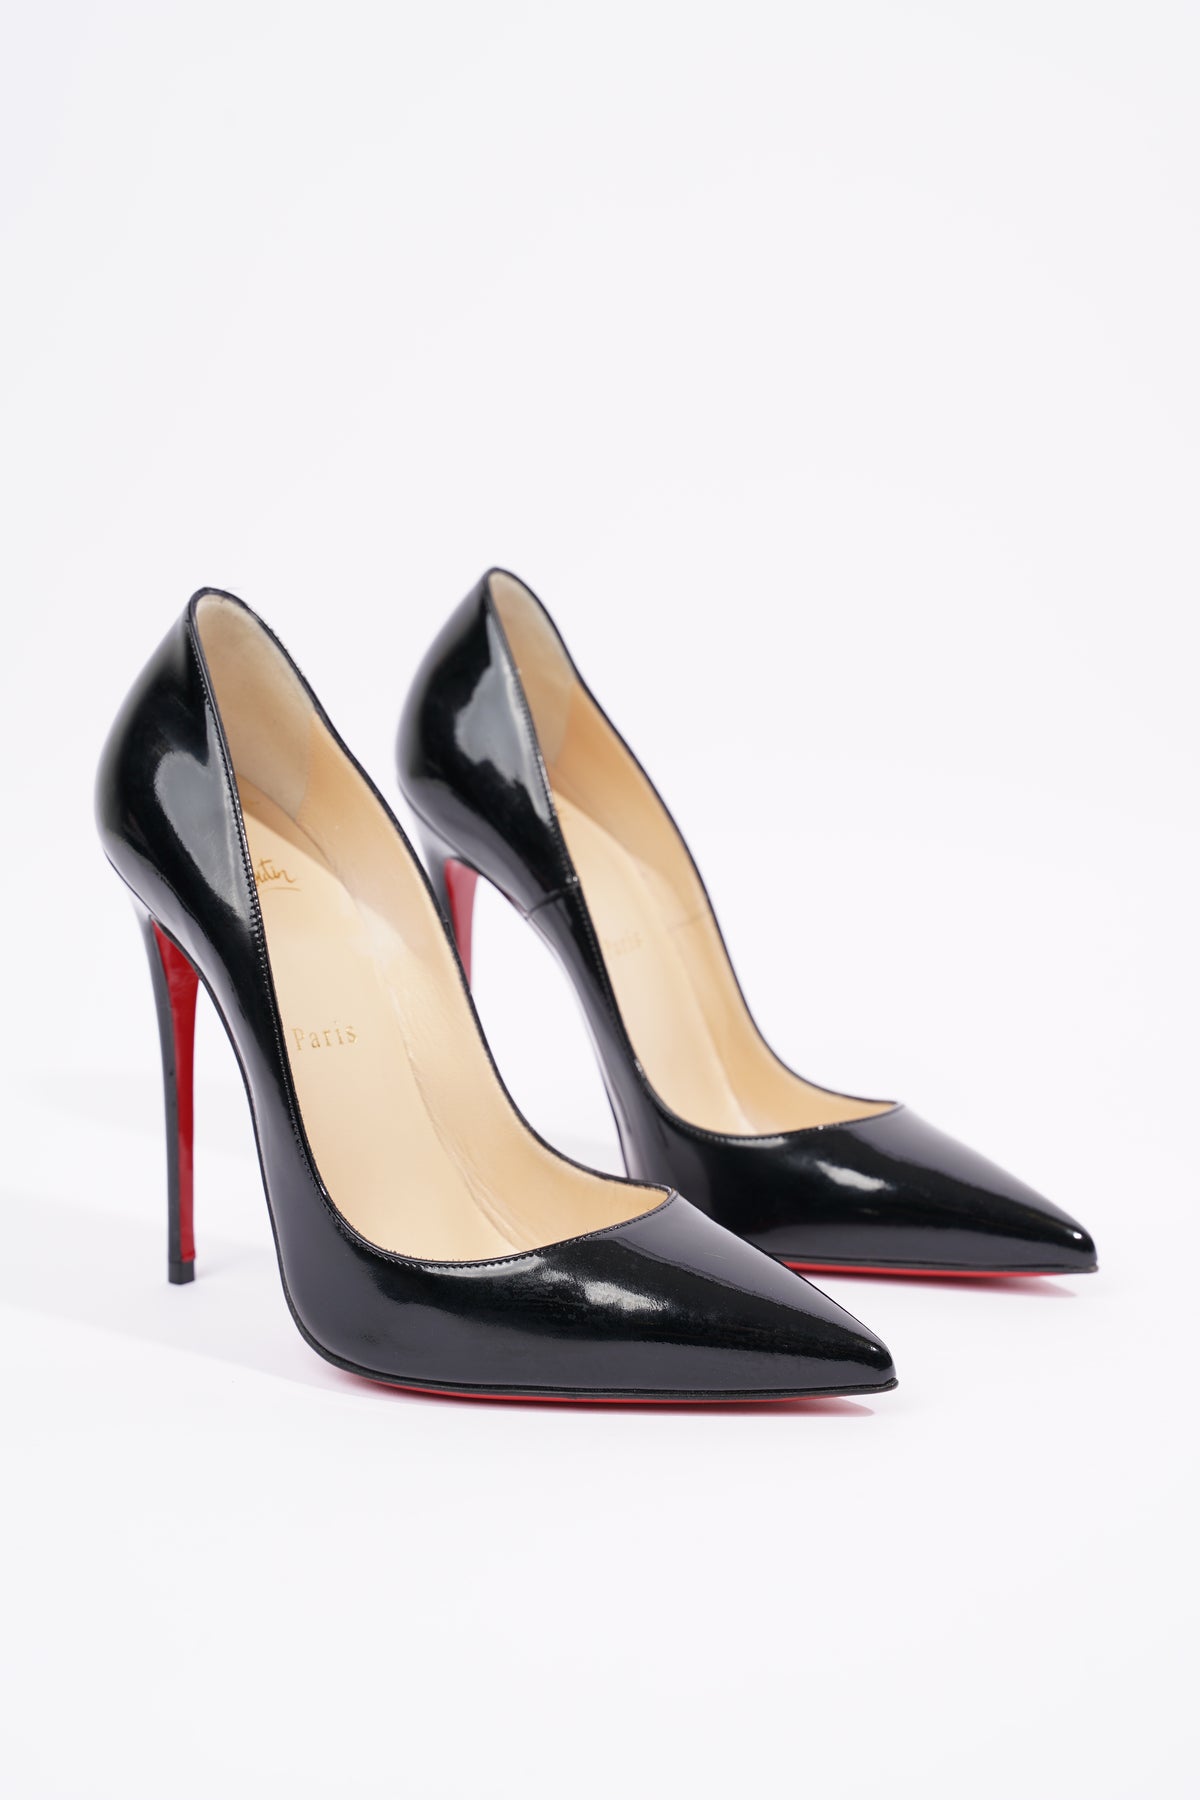 Christian Louboutin So Kate shoes women black leather high heels size 5.5